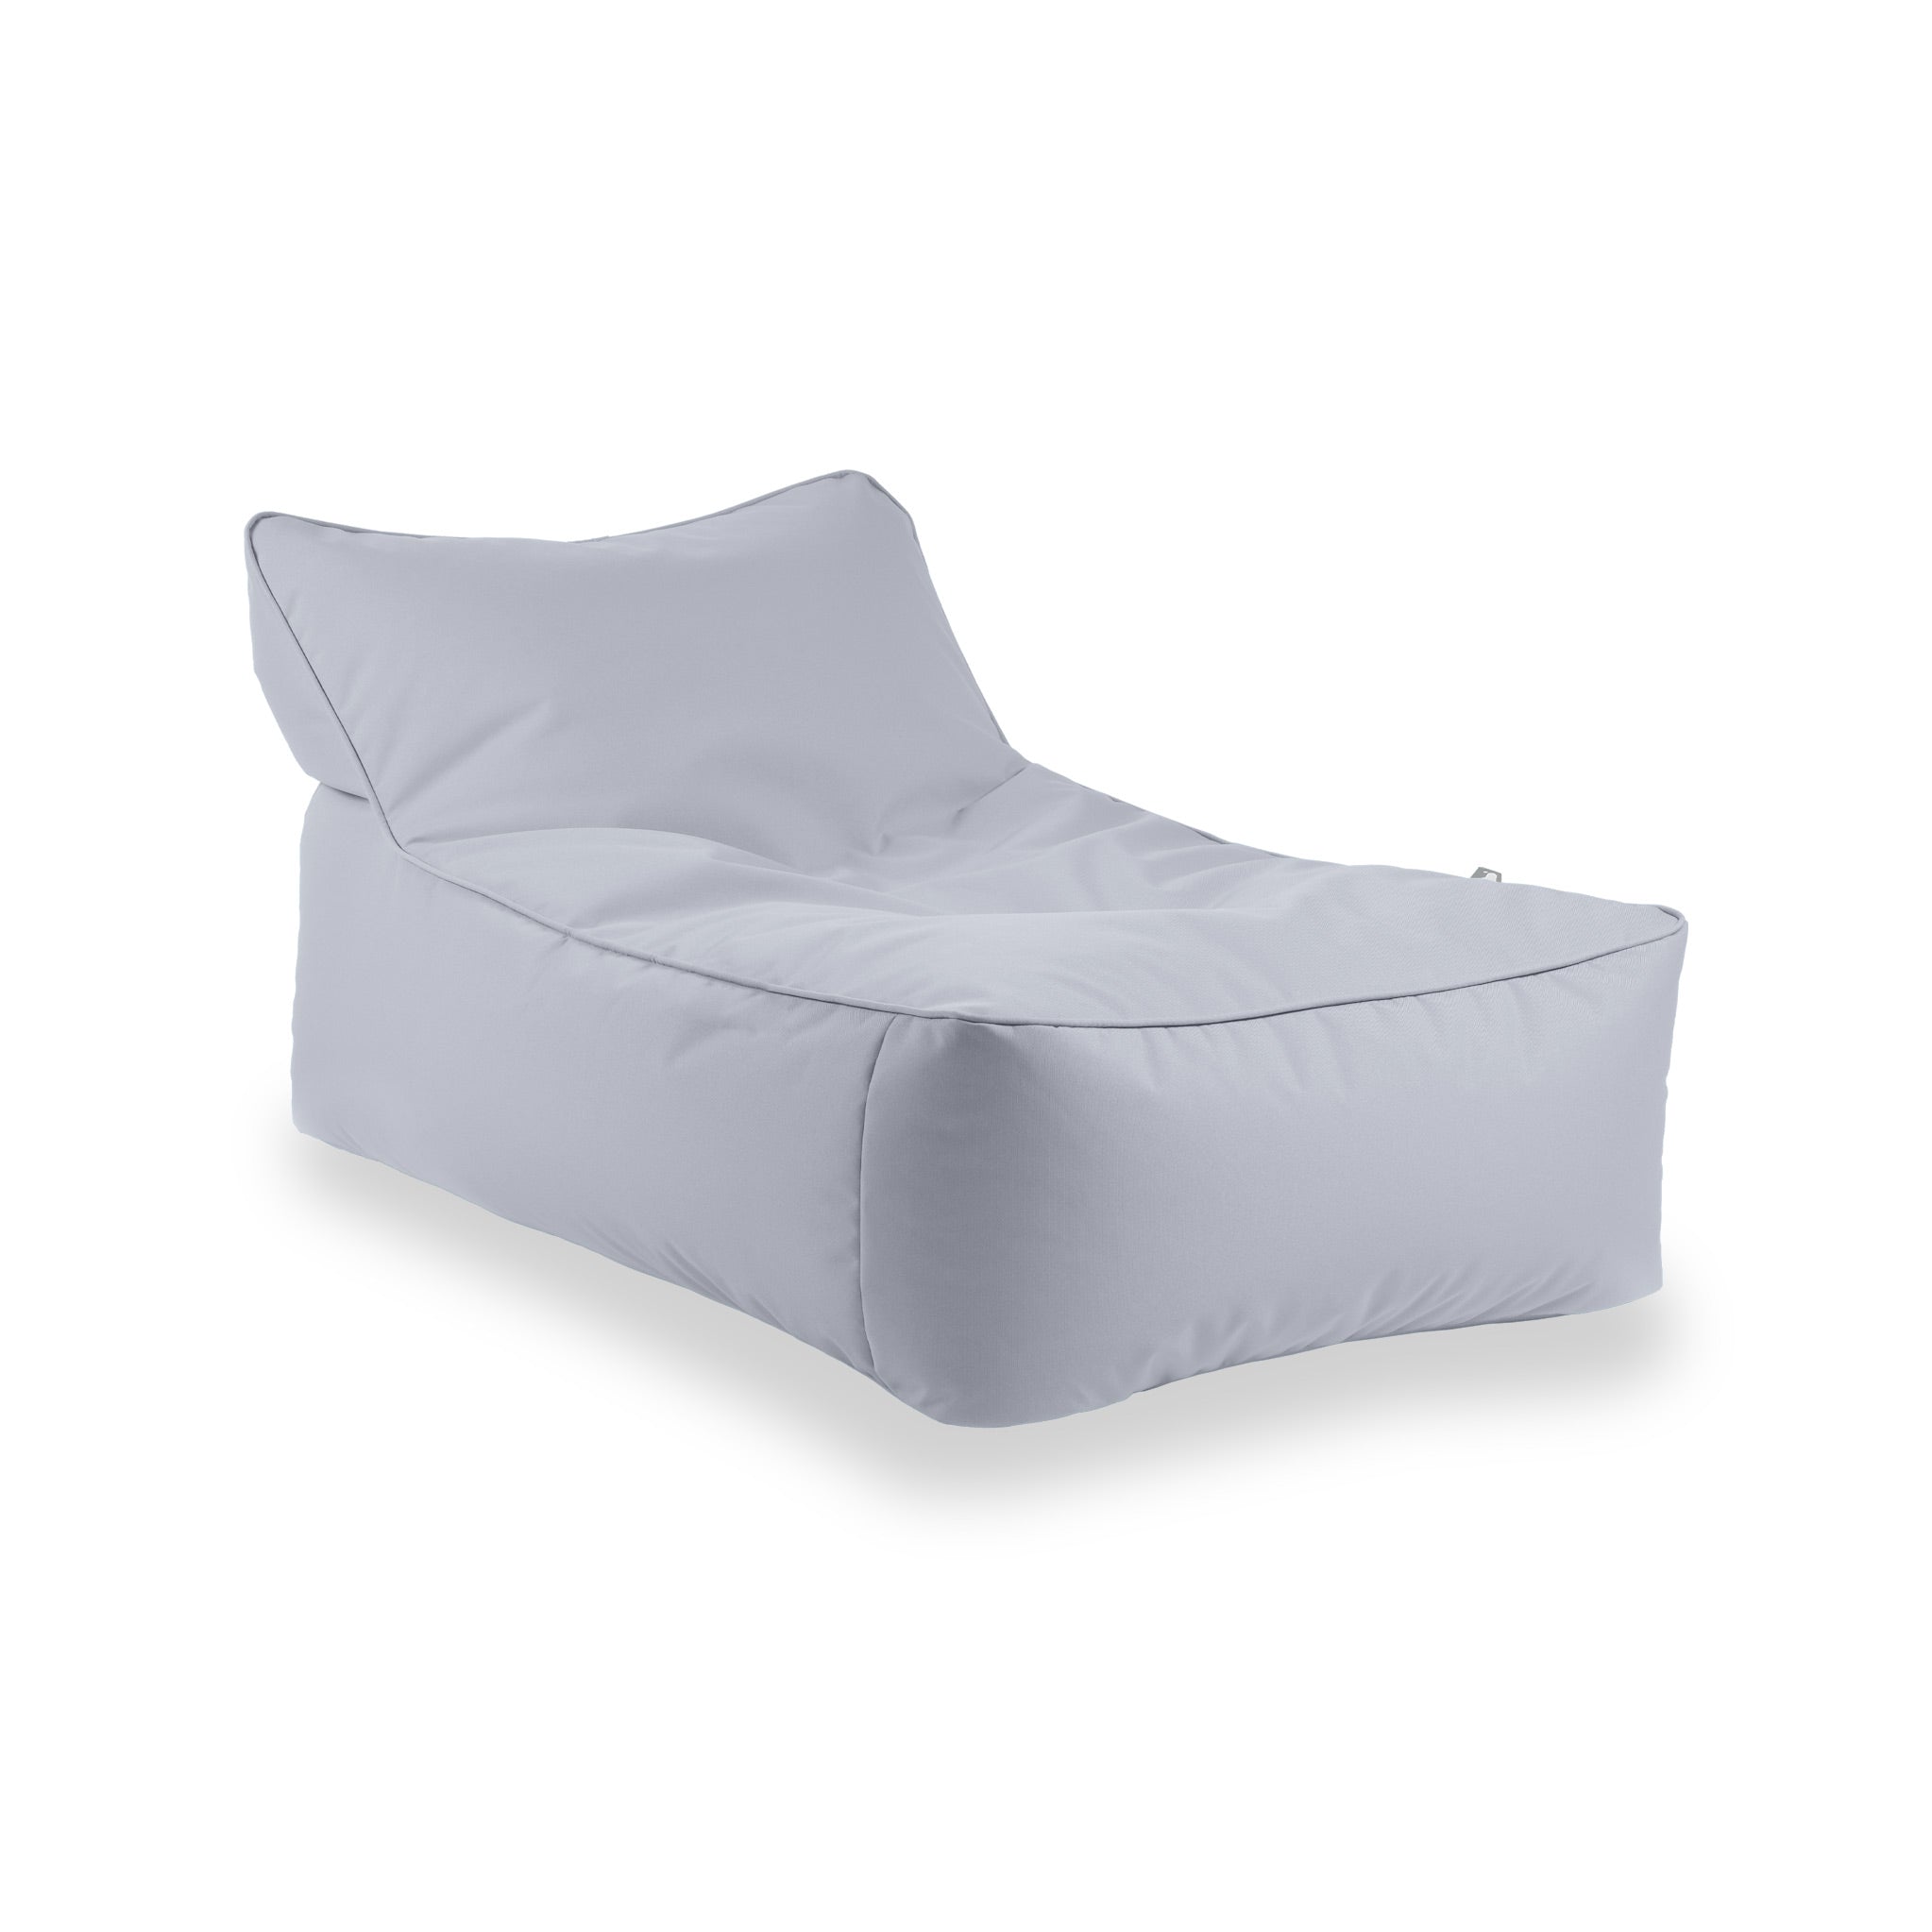 Pastel Bean Bed For Adults Or Kids Extra Large Waterproof Bean Bag